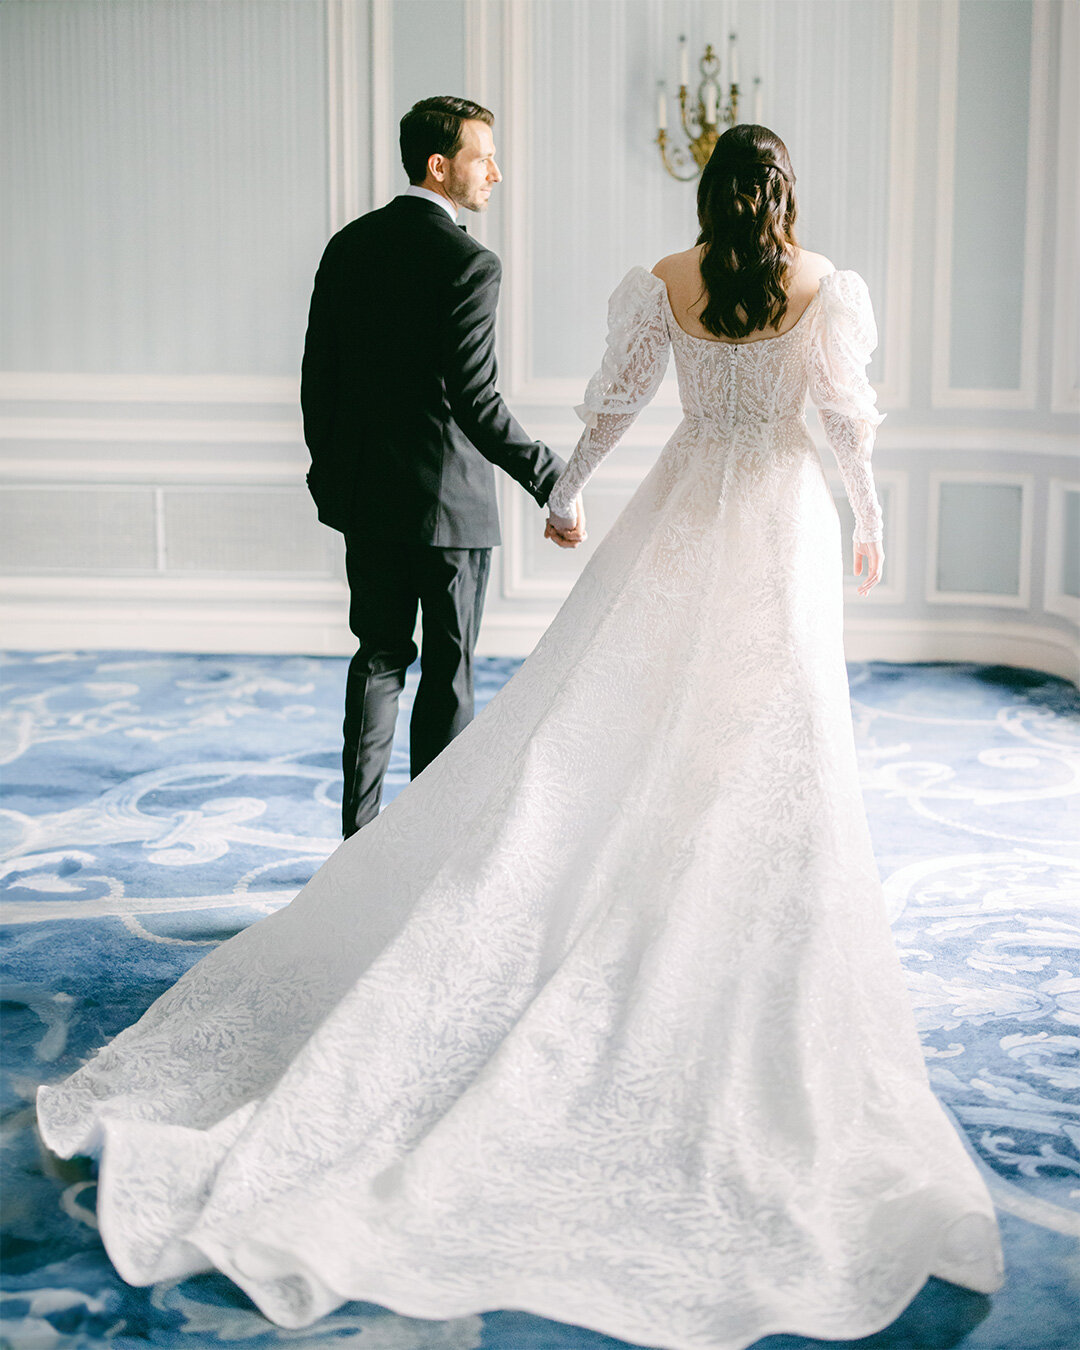 Erin was pure elegance in her @reemacrawedding gown which fit in perfectly with her timeless Drake wedding. Kevin nailed it too. 

Impeccable planning by @katie.goggin @designereventchicago
Decor by @northerngreenhouses
Hair @magnificentbrides
Makeup